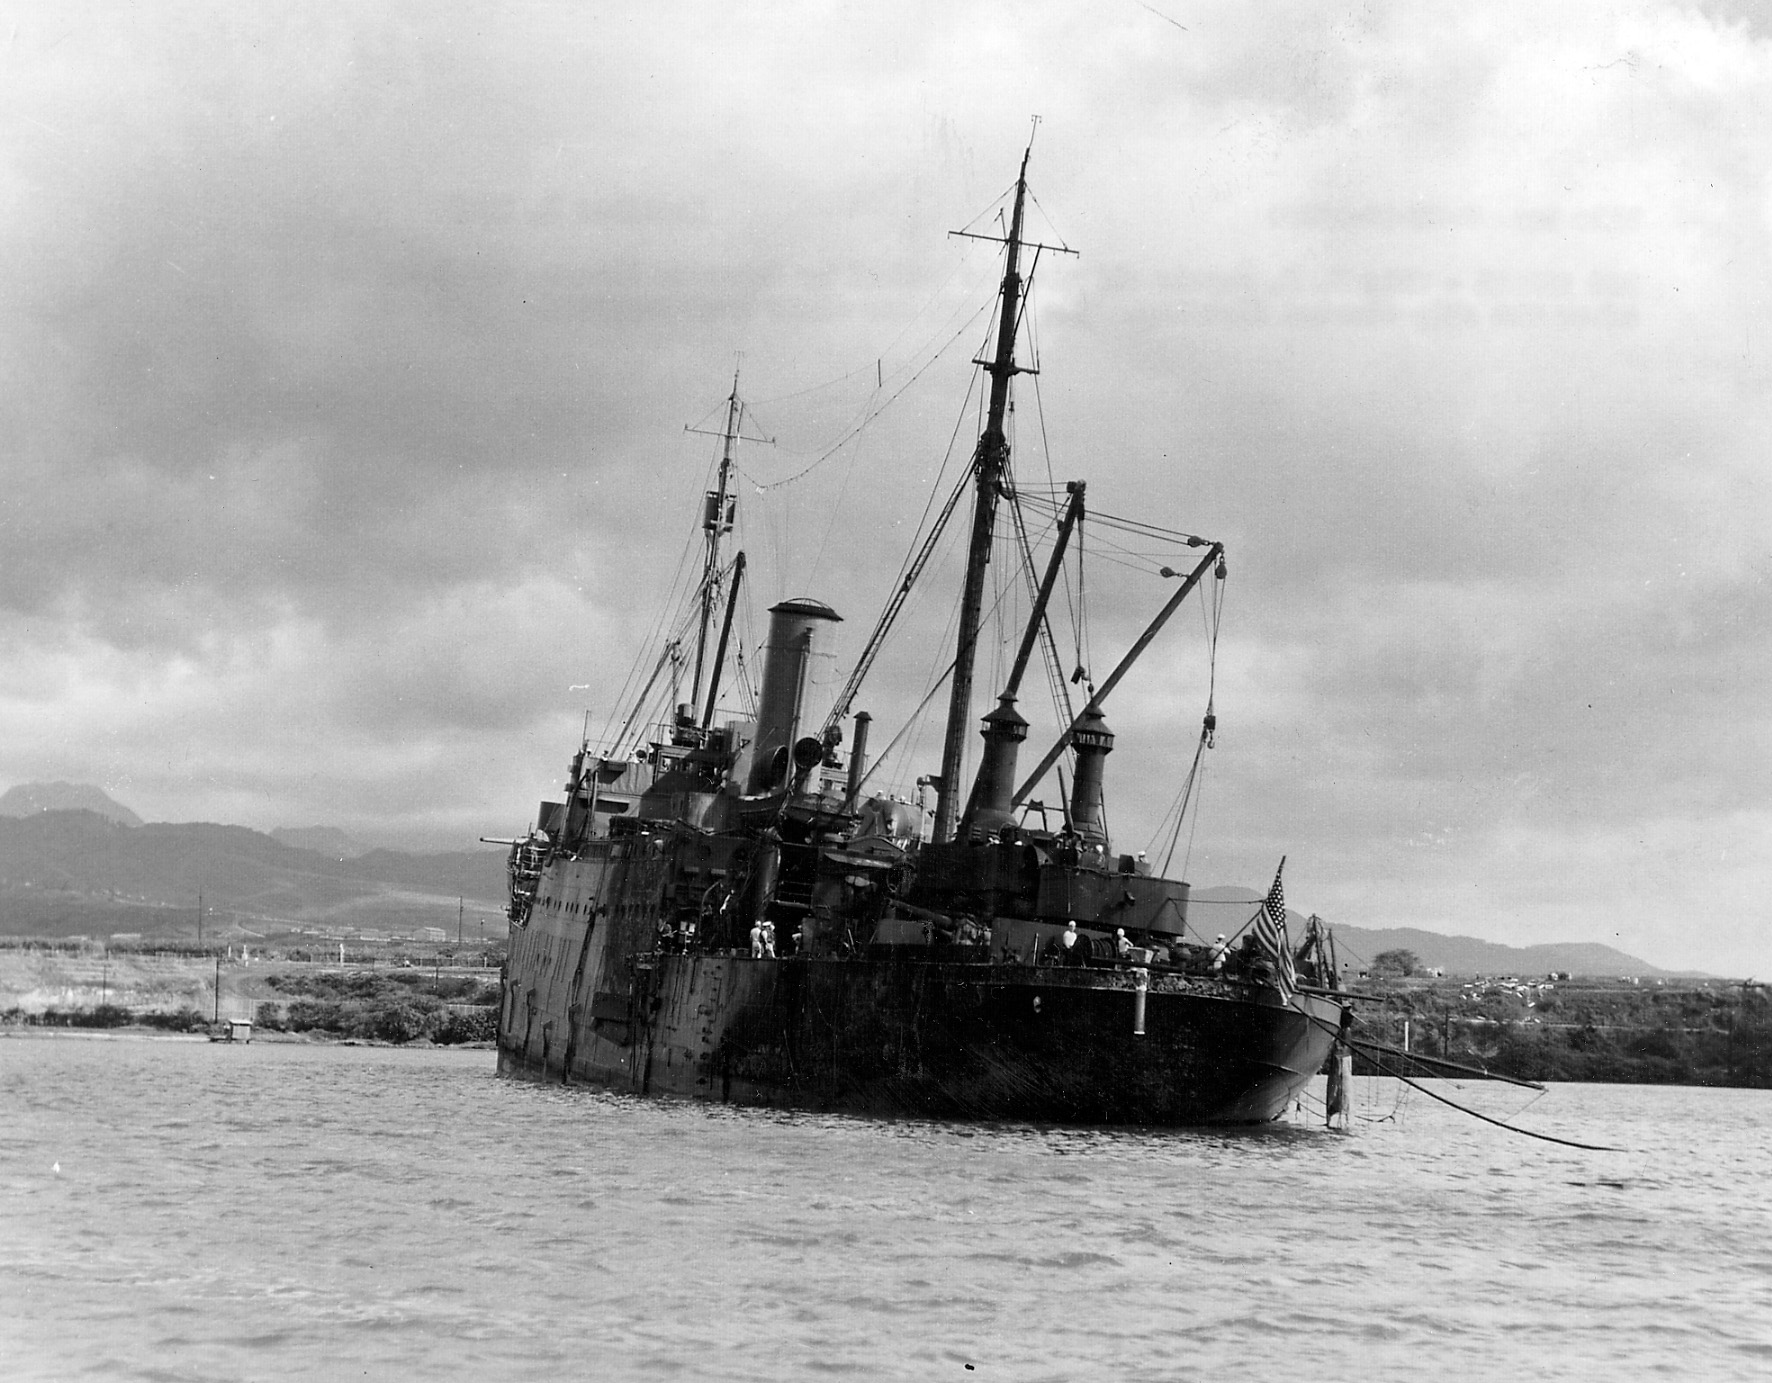 After being twice bombed by Japanese fliers, the USS Vestal sits beached following flooding triggered from the damage she sustained.